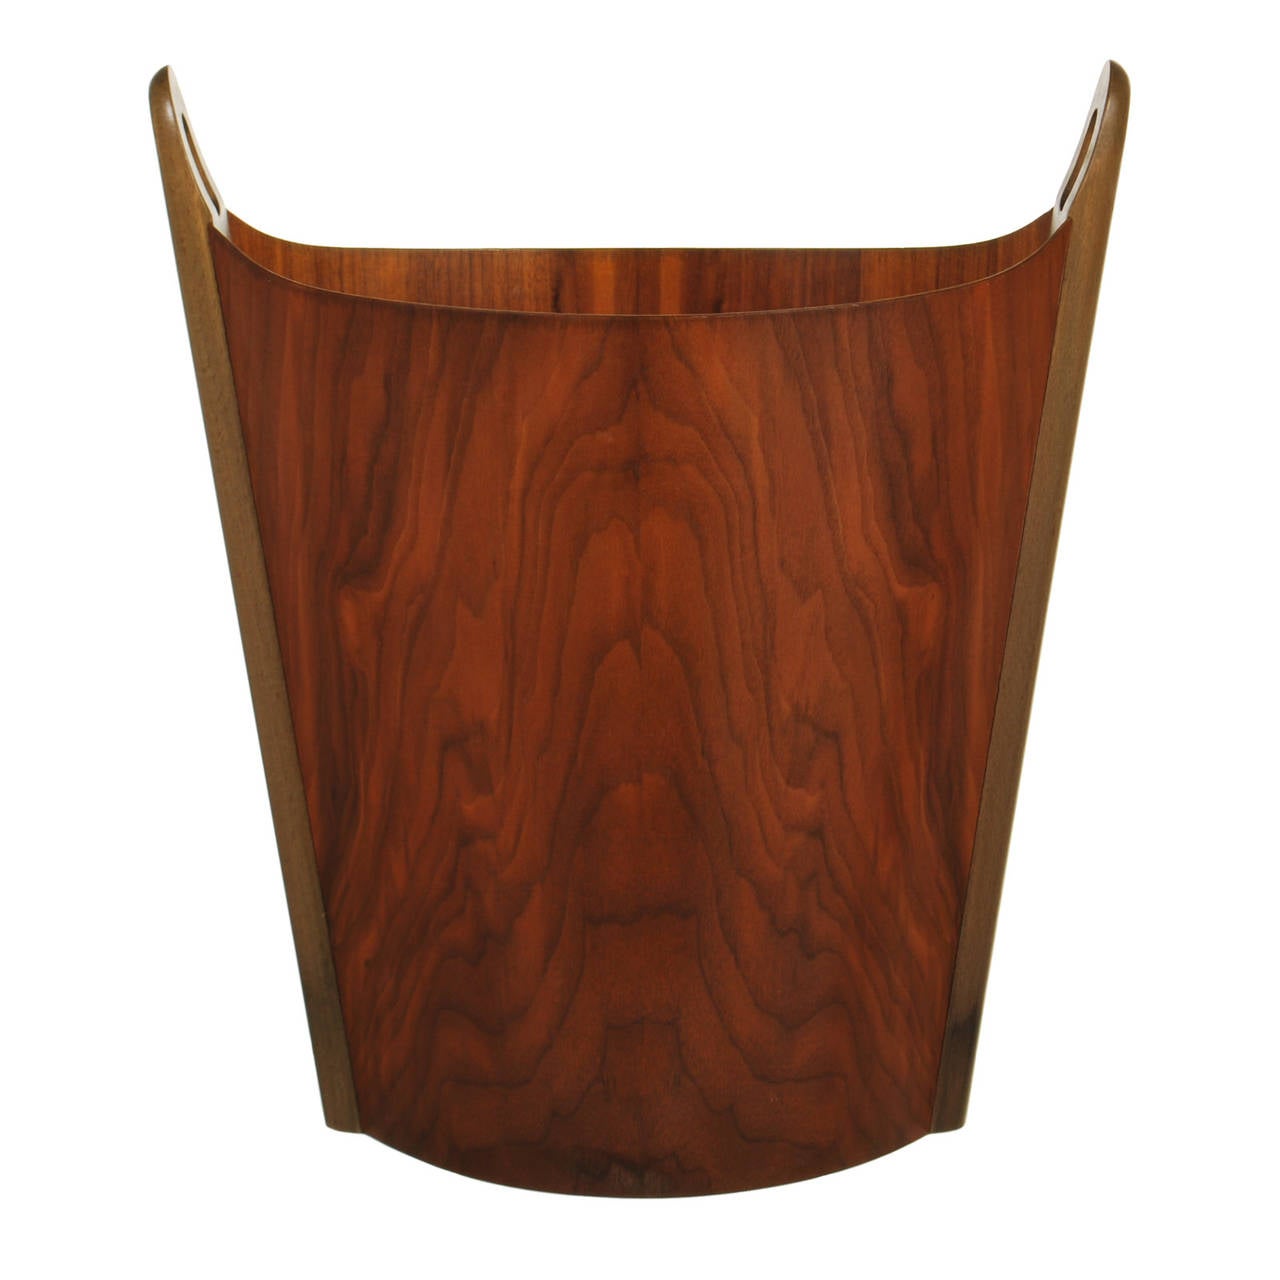 This lovely Danish design wastepaper basket was designed by Einar Barnes and manufactured by P. S. Heggen of Norway. This one is more unique than most as it is two-tone, with a walnut basket and beech? Handles. This is the perfect accessory for the